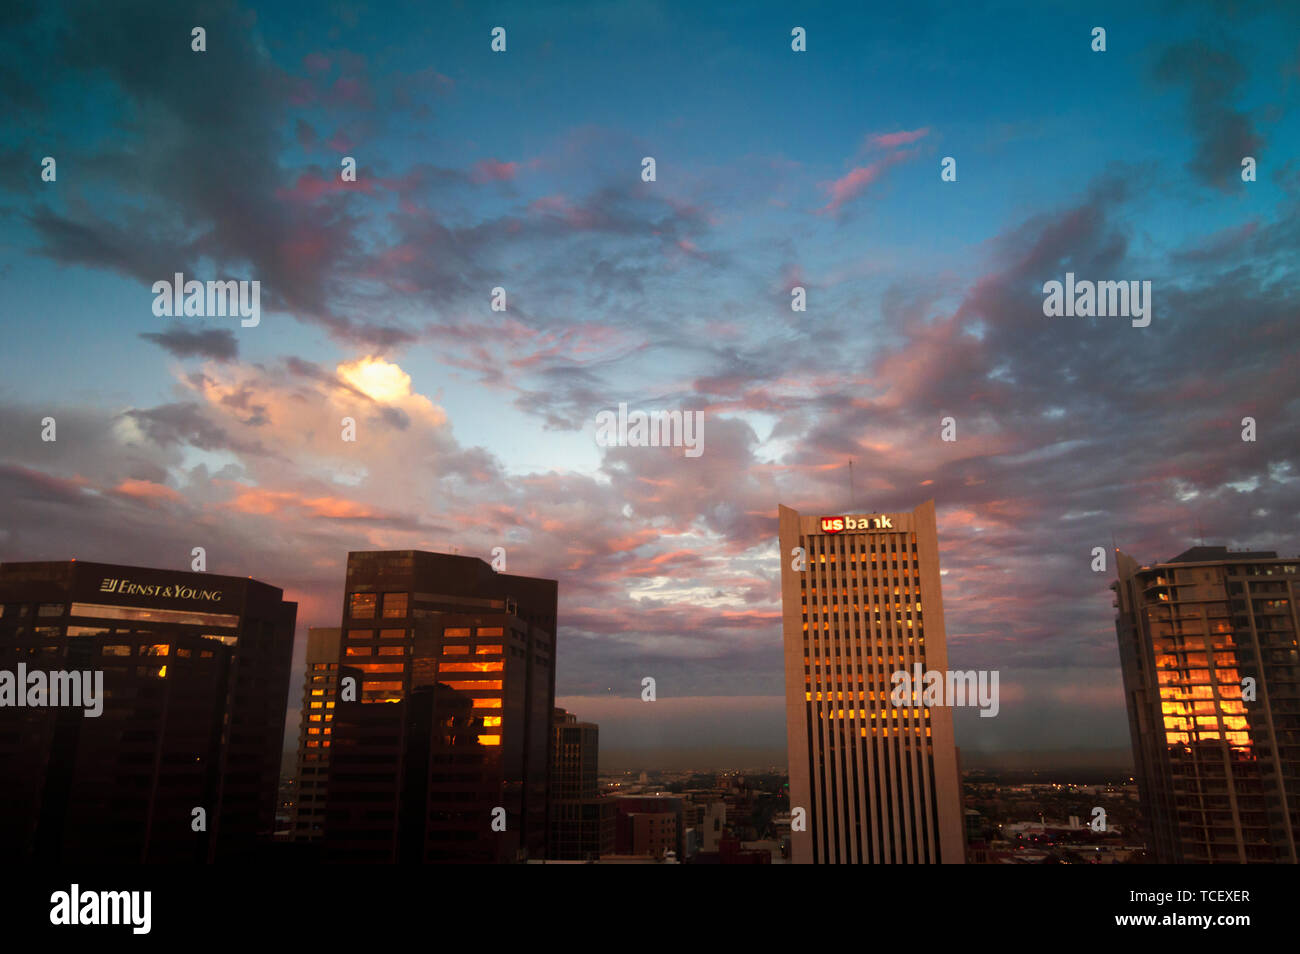 Phoenix, ARIZONA - October 21 2017: Skyscrapers in central Phoenix in red sunrise light. View from the 22nd floor. Stock Photo